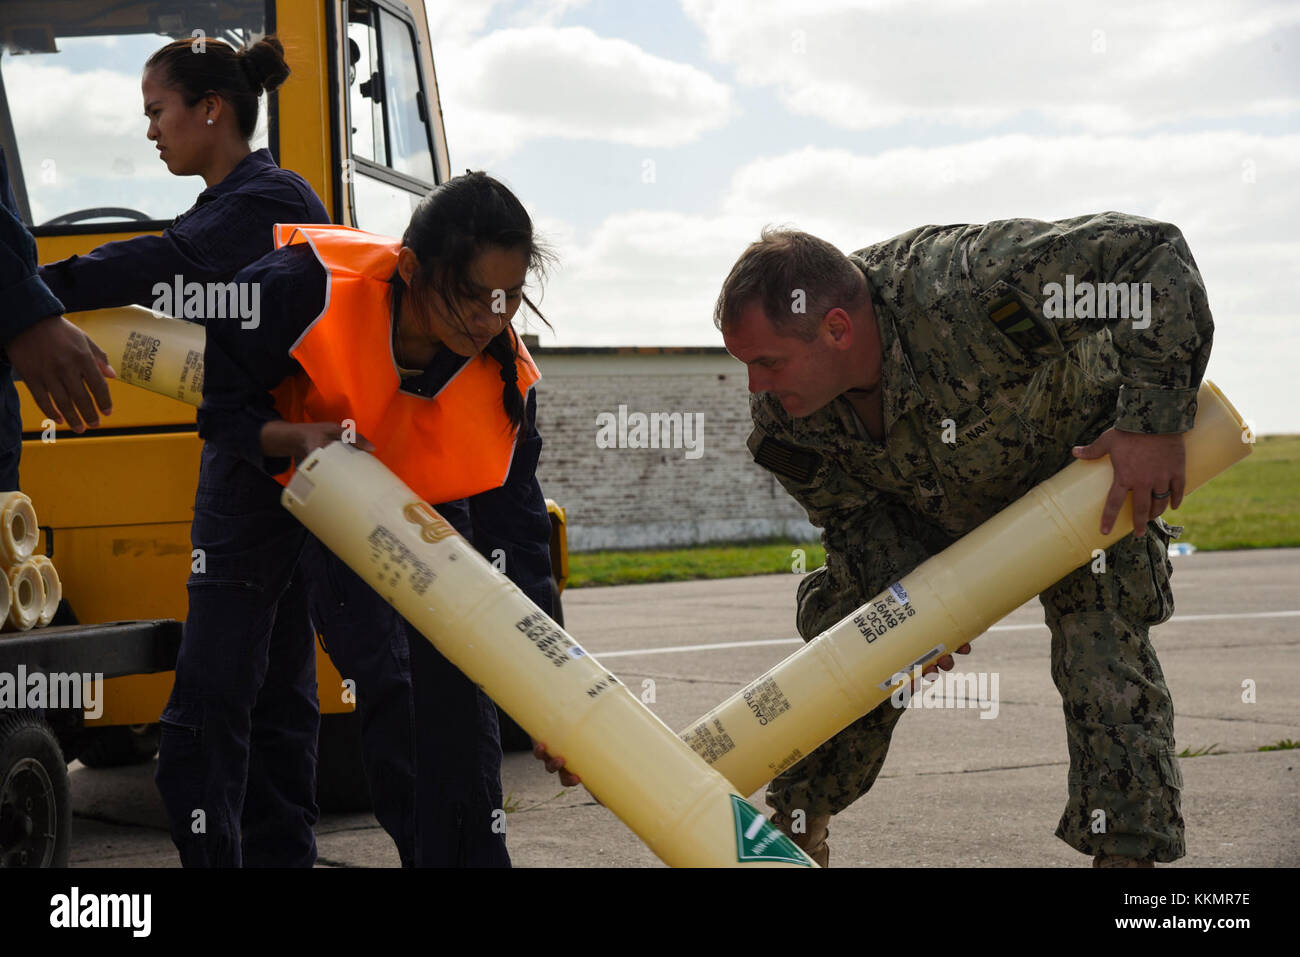 Bahia Blanca, ARGENTINA (Nov. 23, 2017) Members of the Argentine Navy help Sailors from the ‘Mad Foxes’ of Patrol Squadron (VP) 5and the ‘Pelicans’ of VP-45load empty sonobouy casings onto a transport vehicle. Sailors from VP-5 and VP-45 are currently in Bahia Blanca as part of a detachment from Commander, Patrol and Reconnaissance Wing (CPRW) 11 assisting the Argentine military in their search for the missing Argentine submarine ARA San Juan. (U.S. Navy photo by Mass Communications Specialist 2nd Class Sean R. Morton/Released) Stock Photo